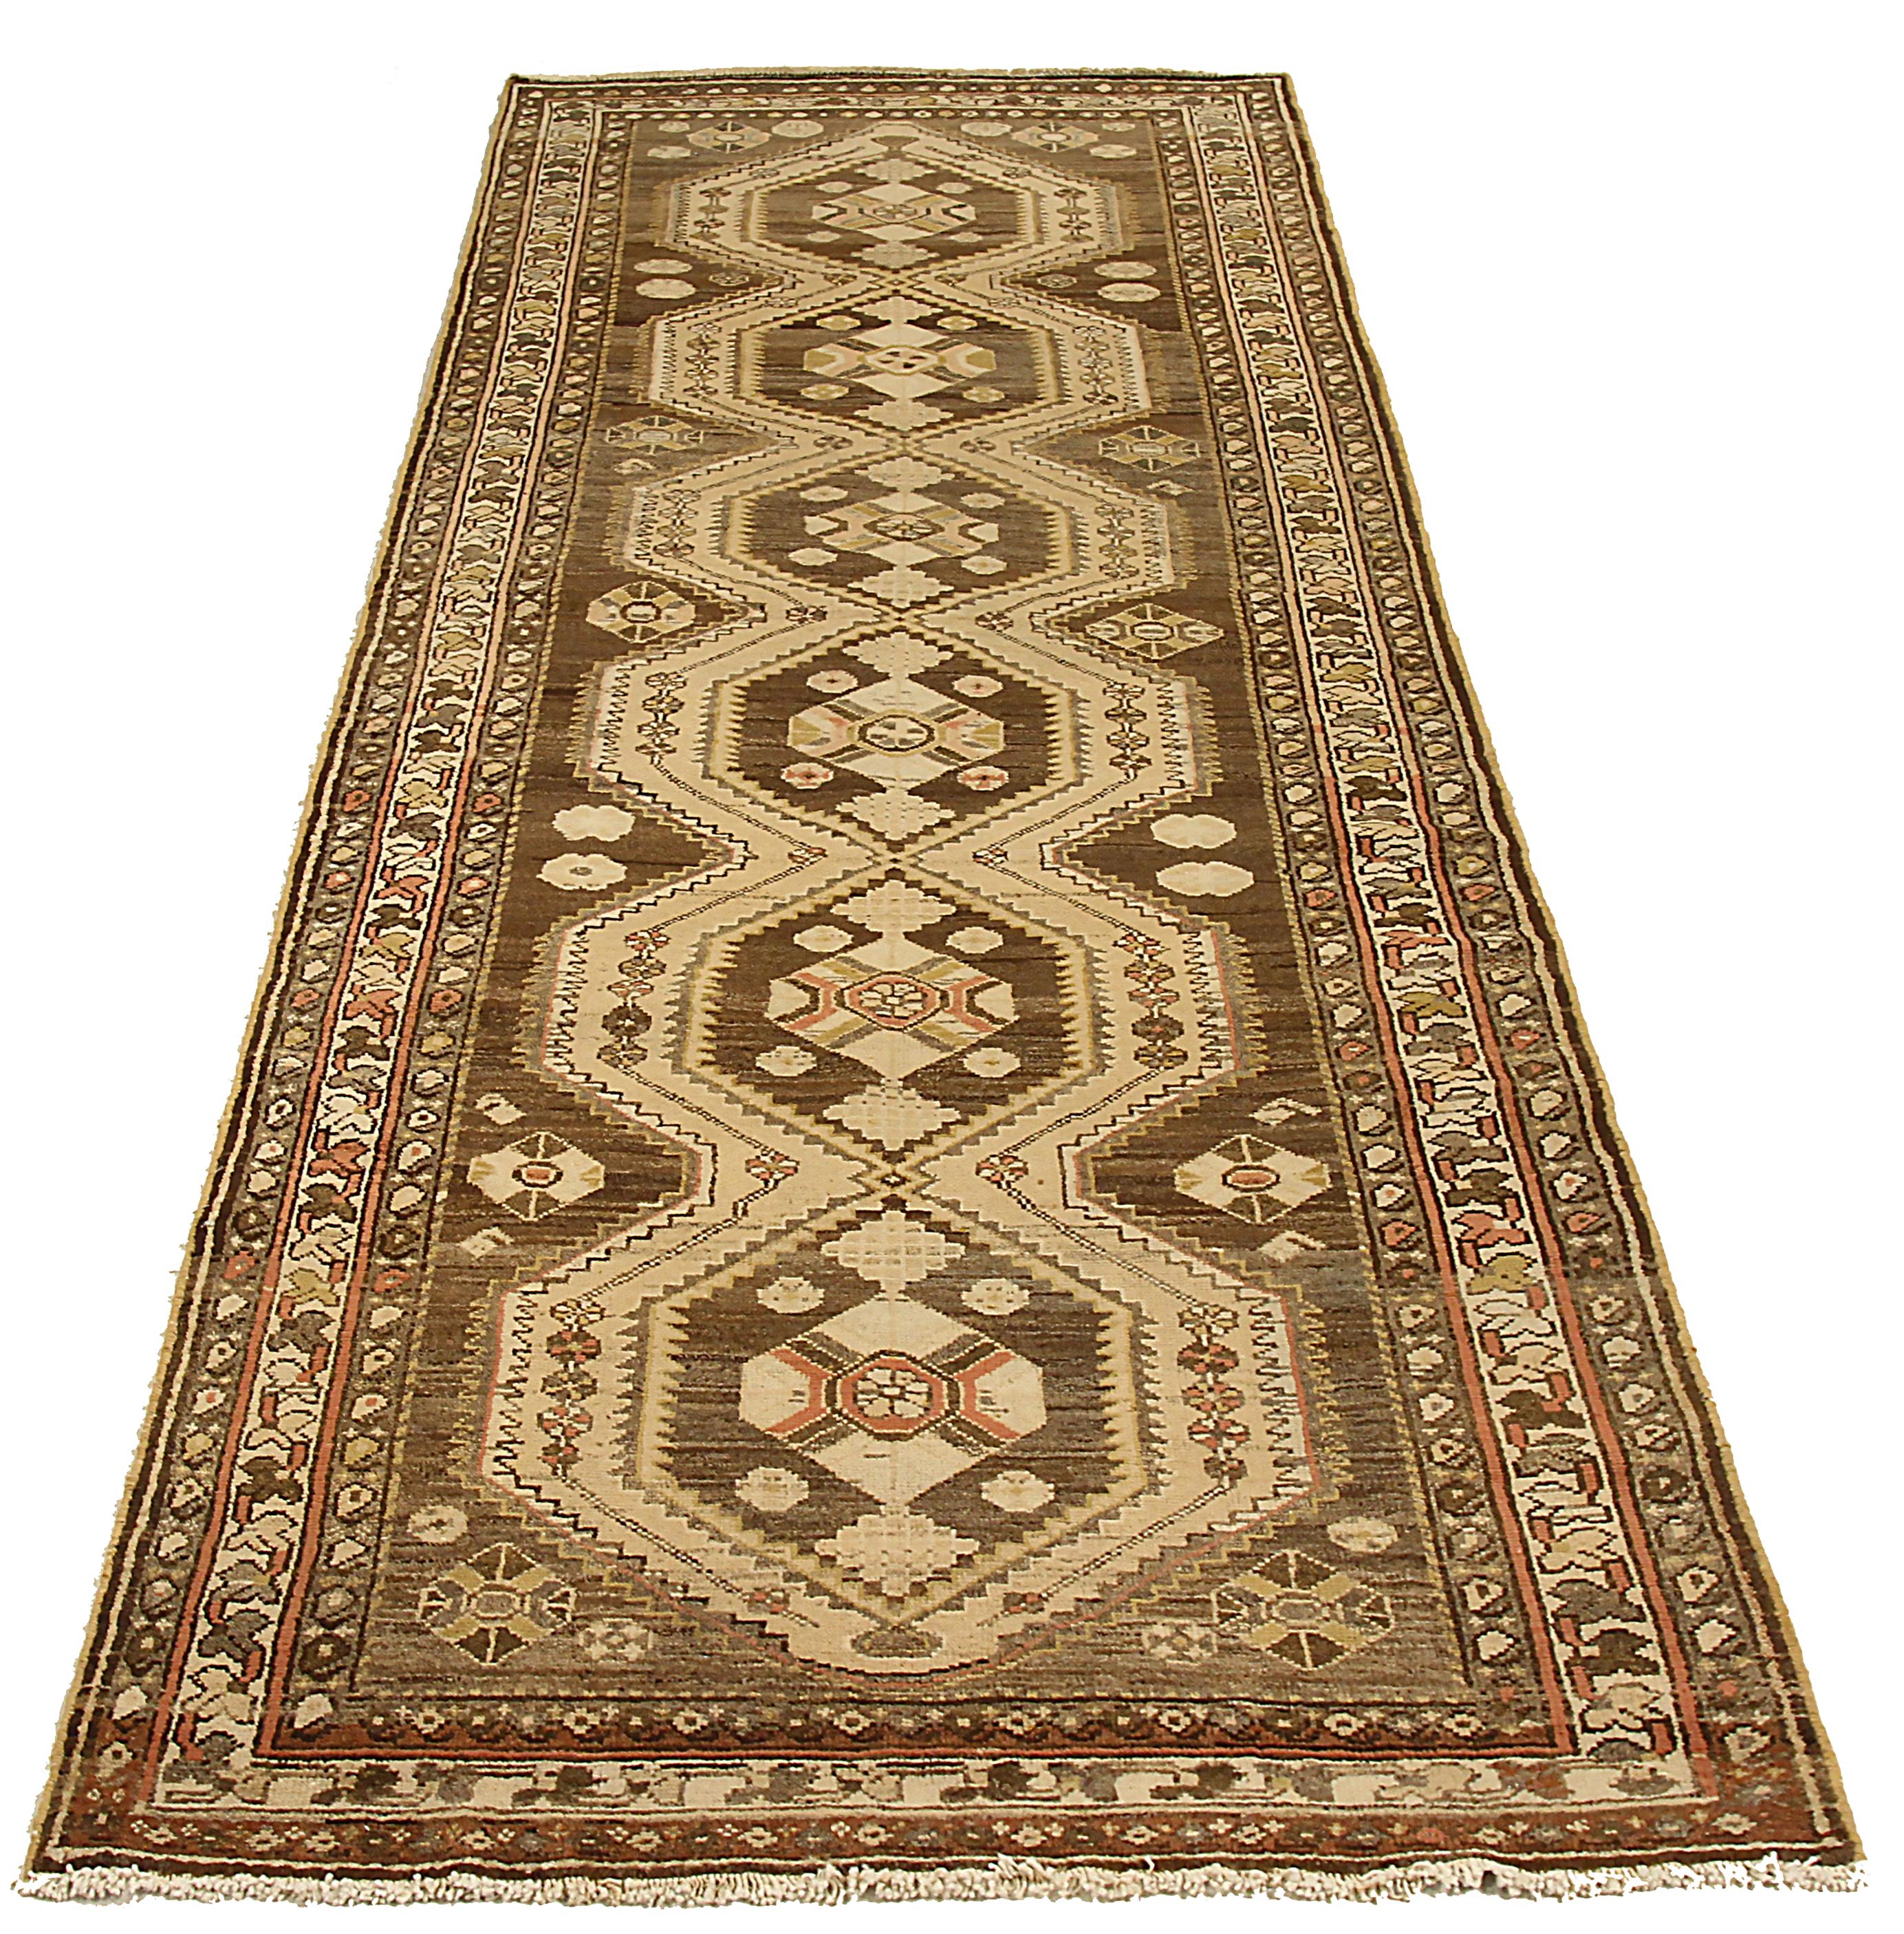 Antique Persian area rug handwoven from the finest sheep’s wool. It’s colored with all-natural vegetable dyes that are safe for humans and pets. It’s a traditional Malayer design featuring geometric design on a brown field. It’s a lovely piece to